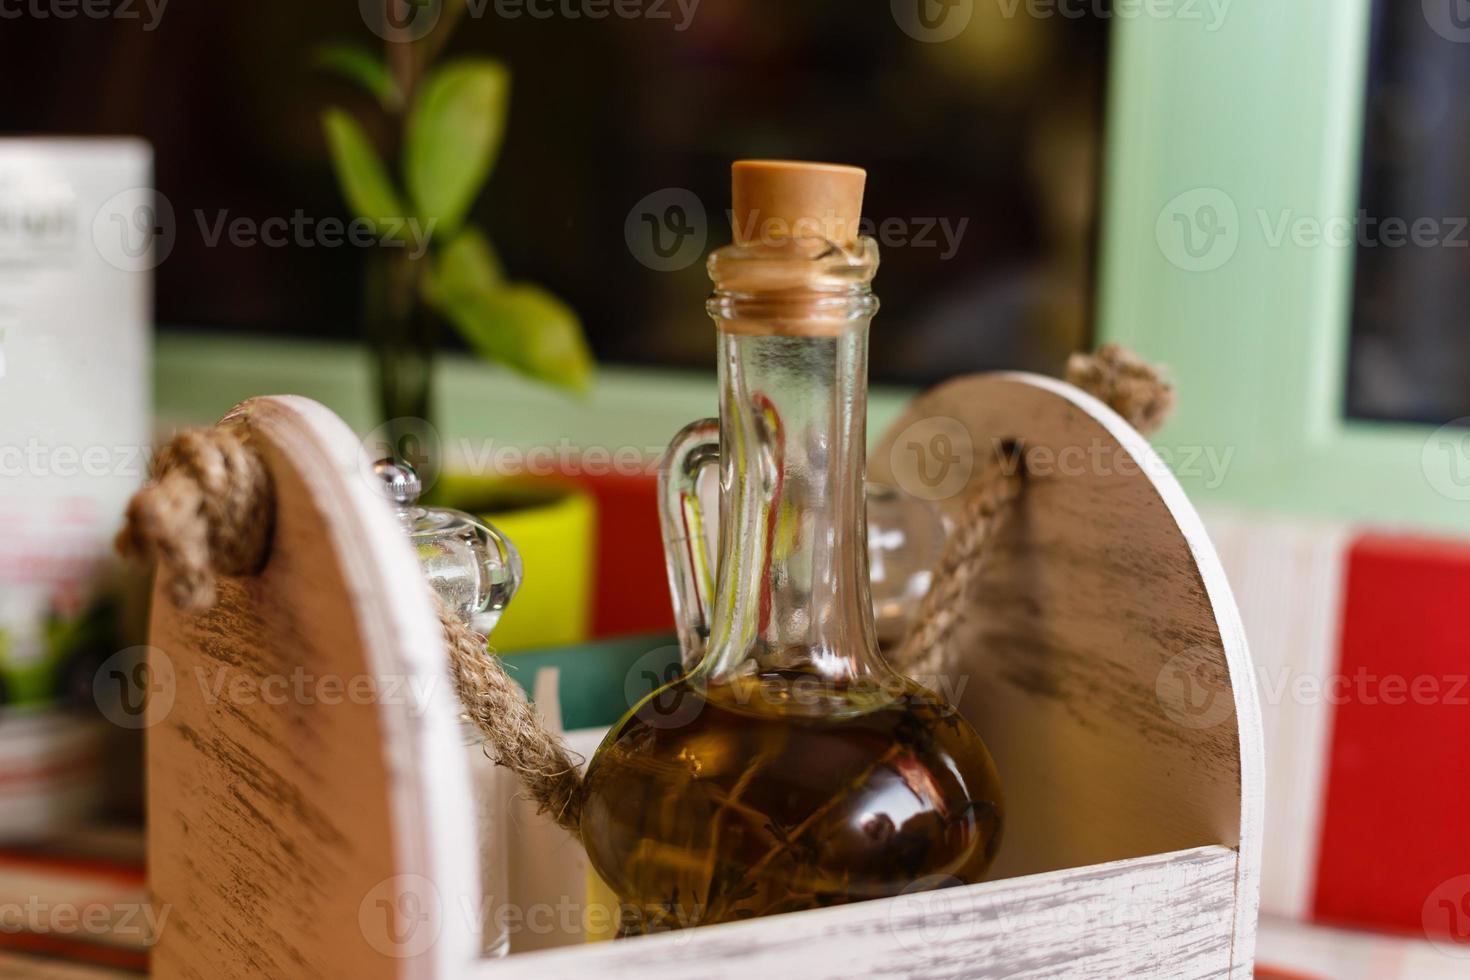 olive oil in a bottle photo